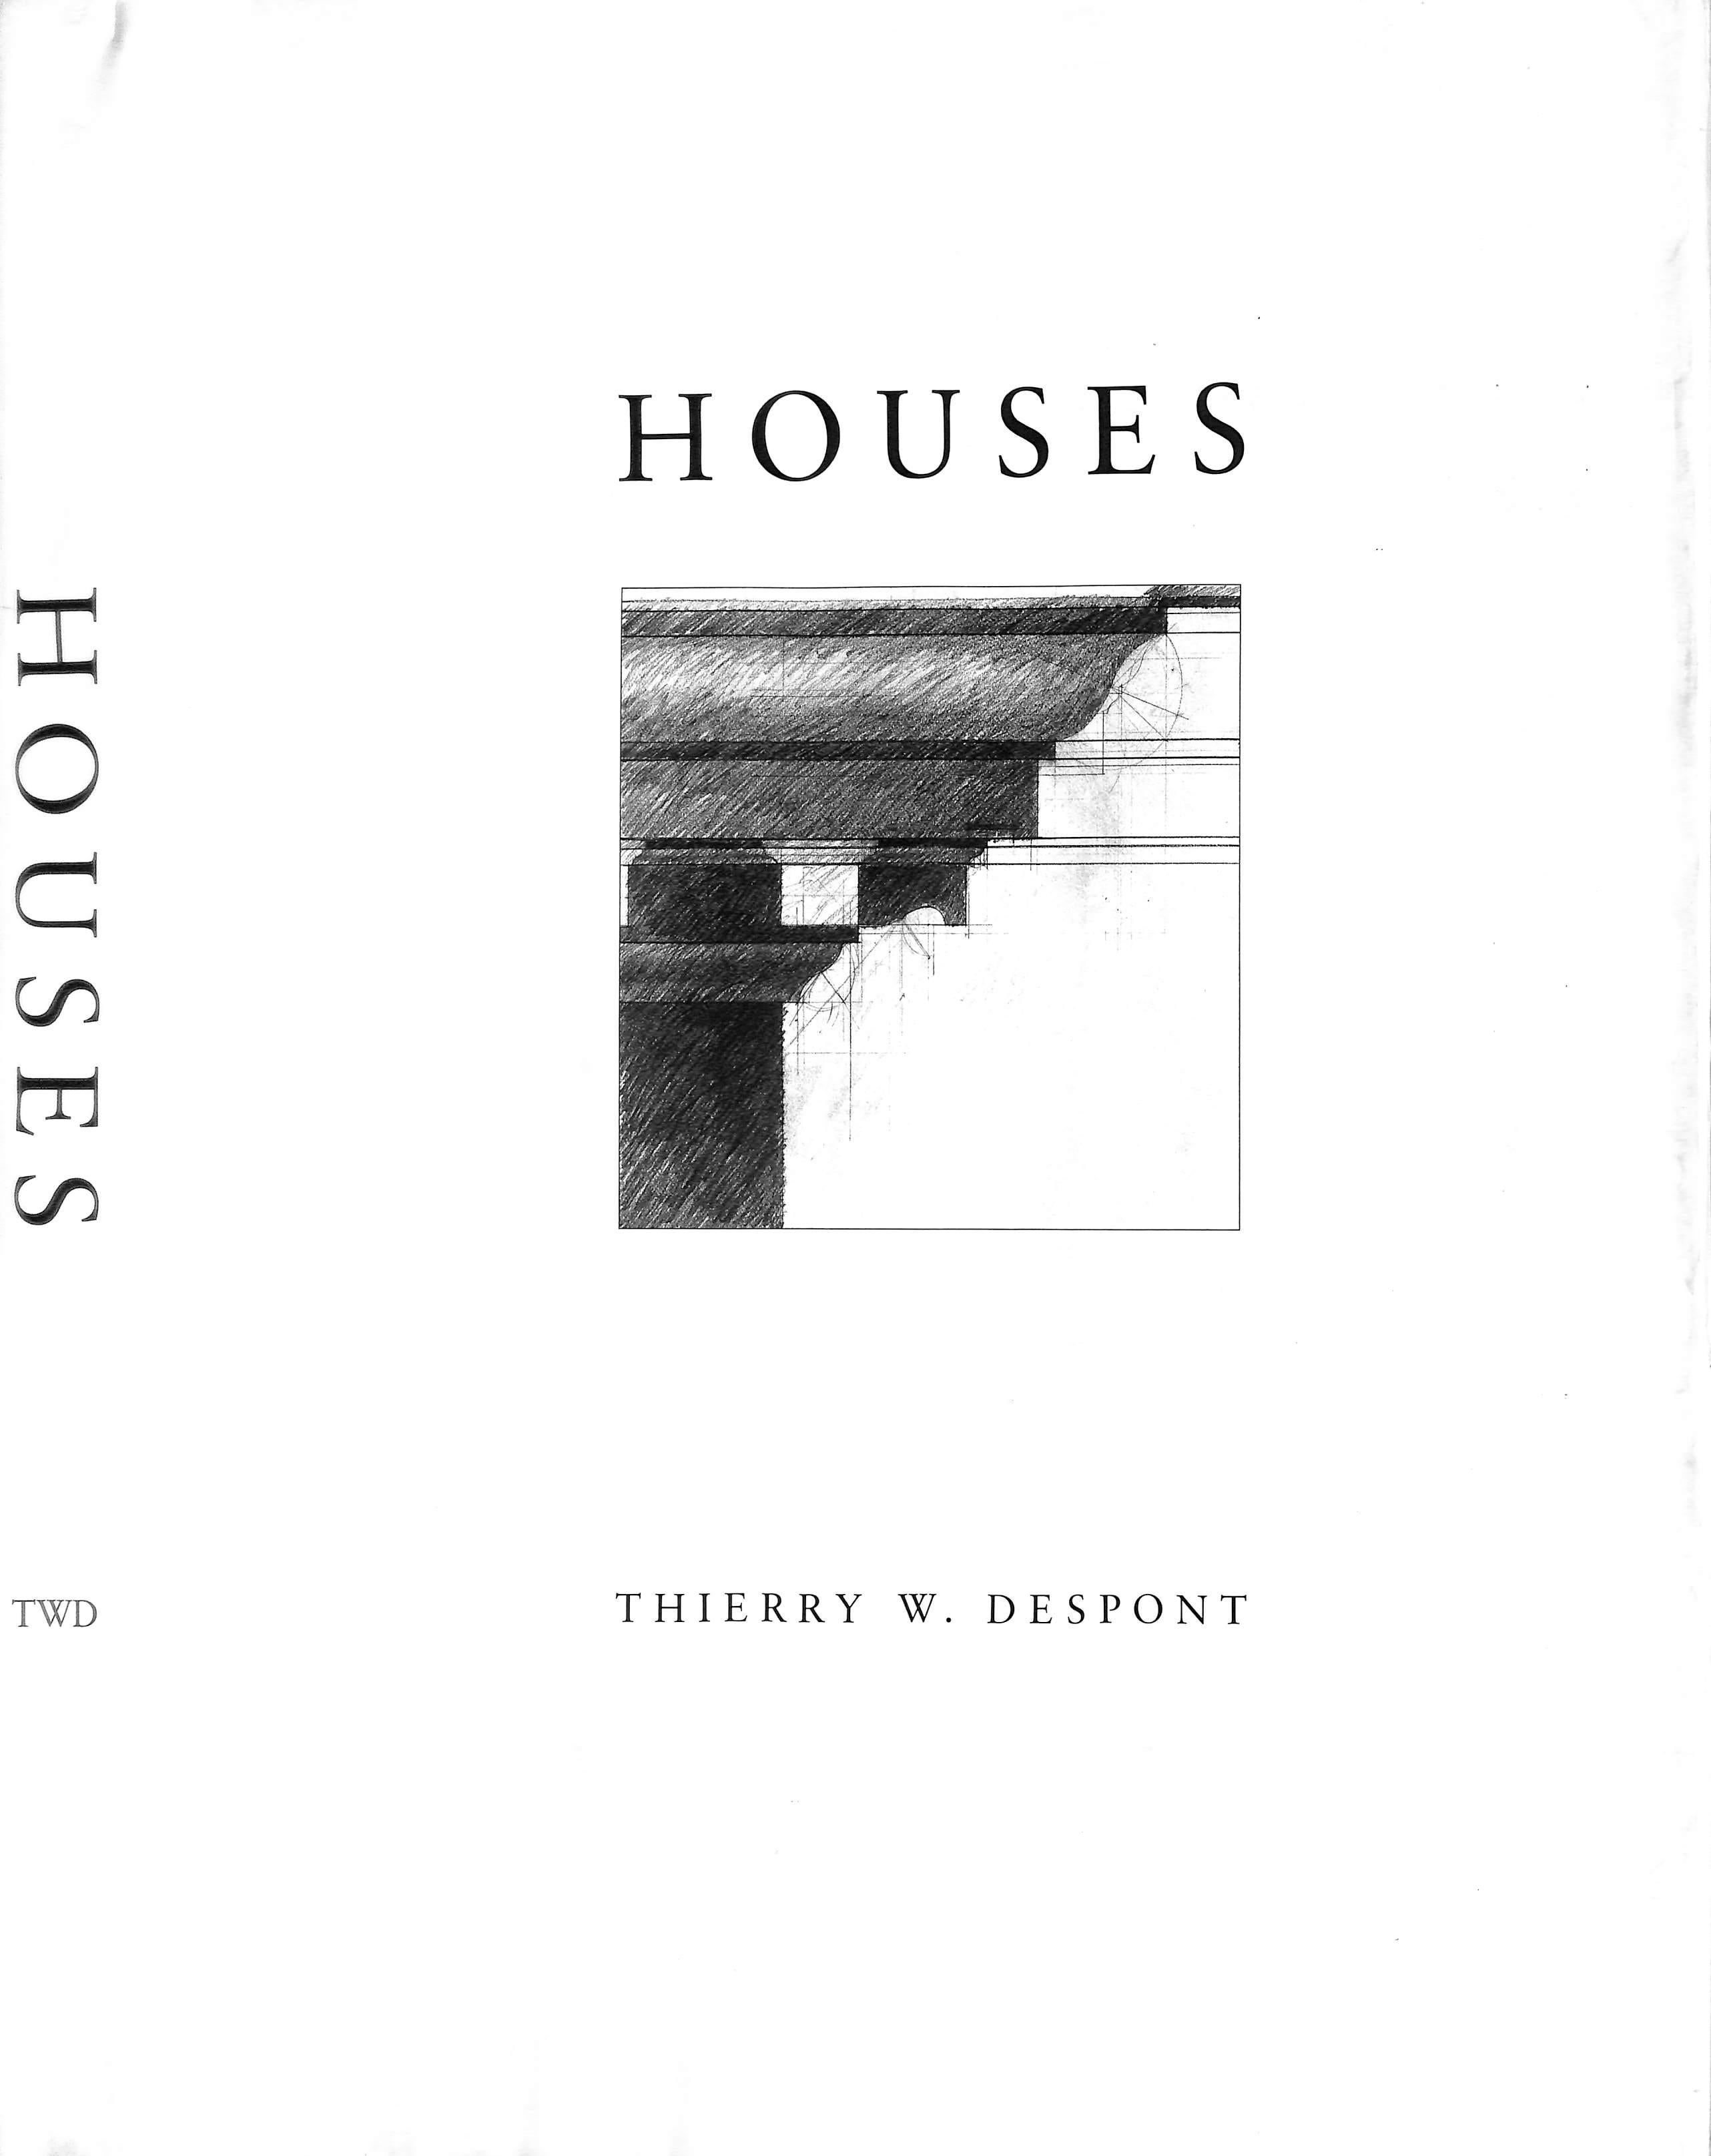 "Houses" 1990 DESPONT, Thierry - Art by DESPONT, Thierry W.